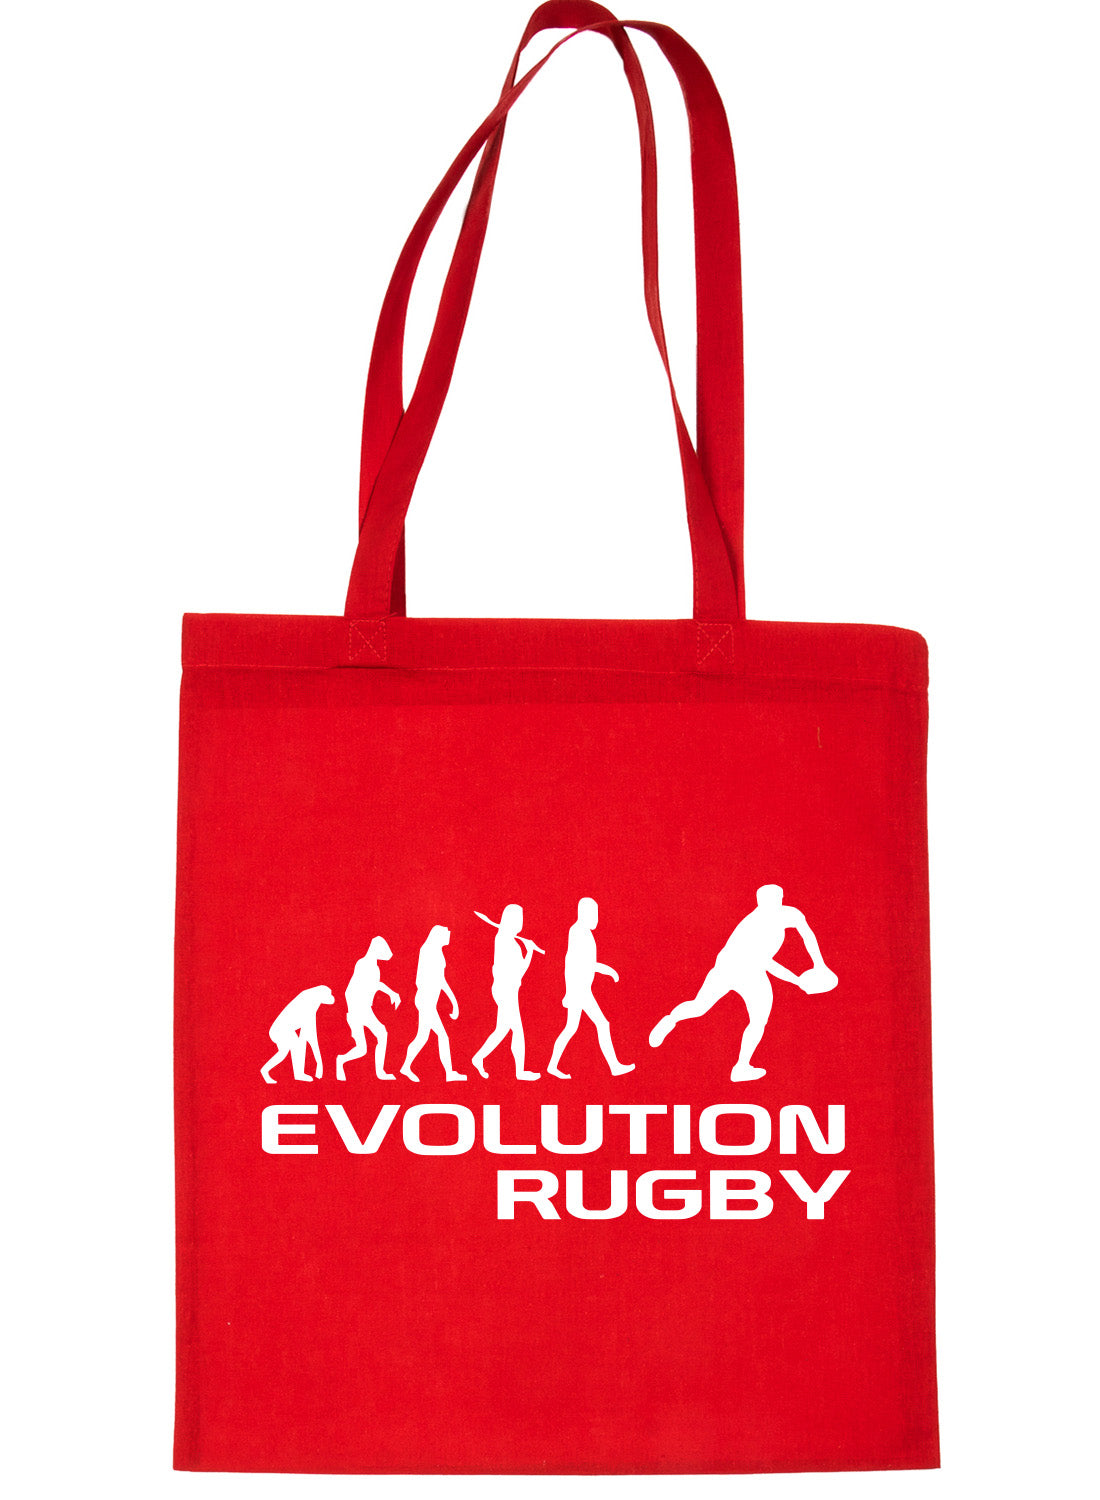 Evolution Of Rugby 6 Nations Bag For Life Shopping Tote Bag Ladies Gift